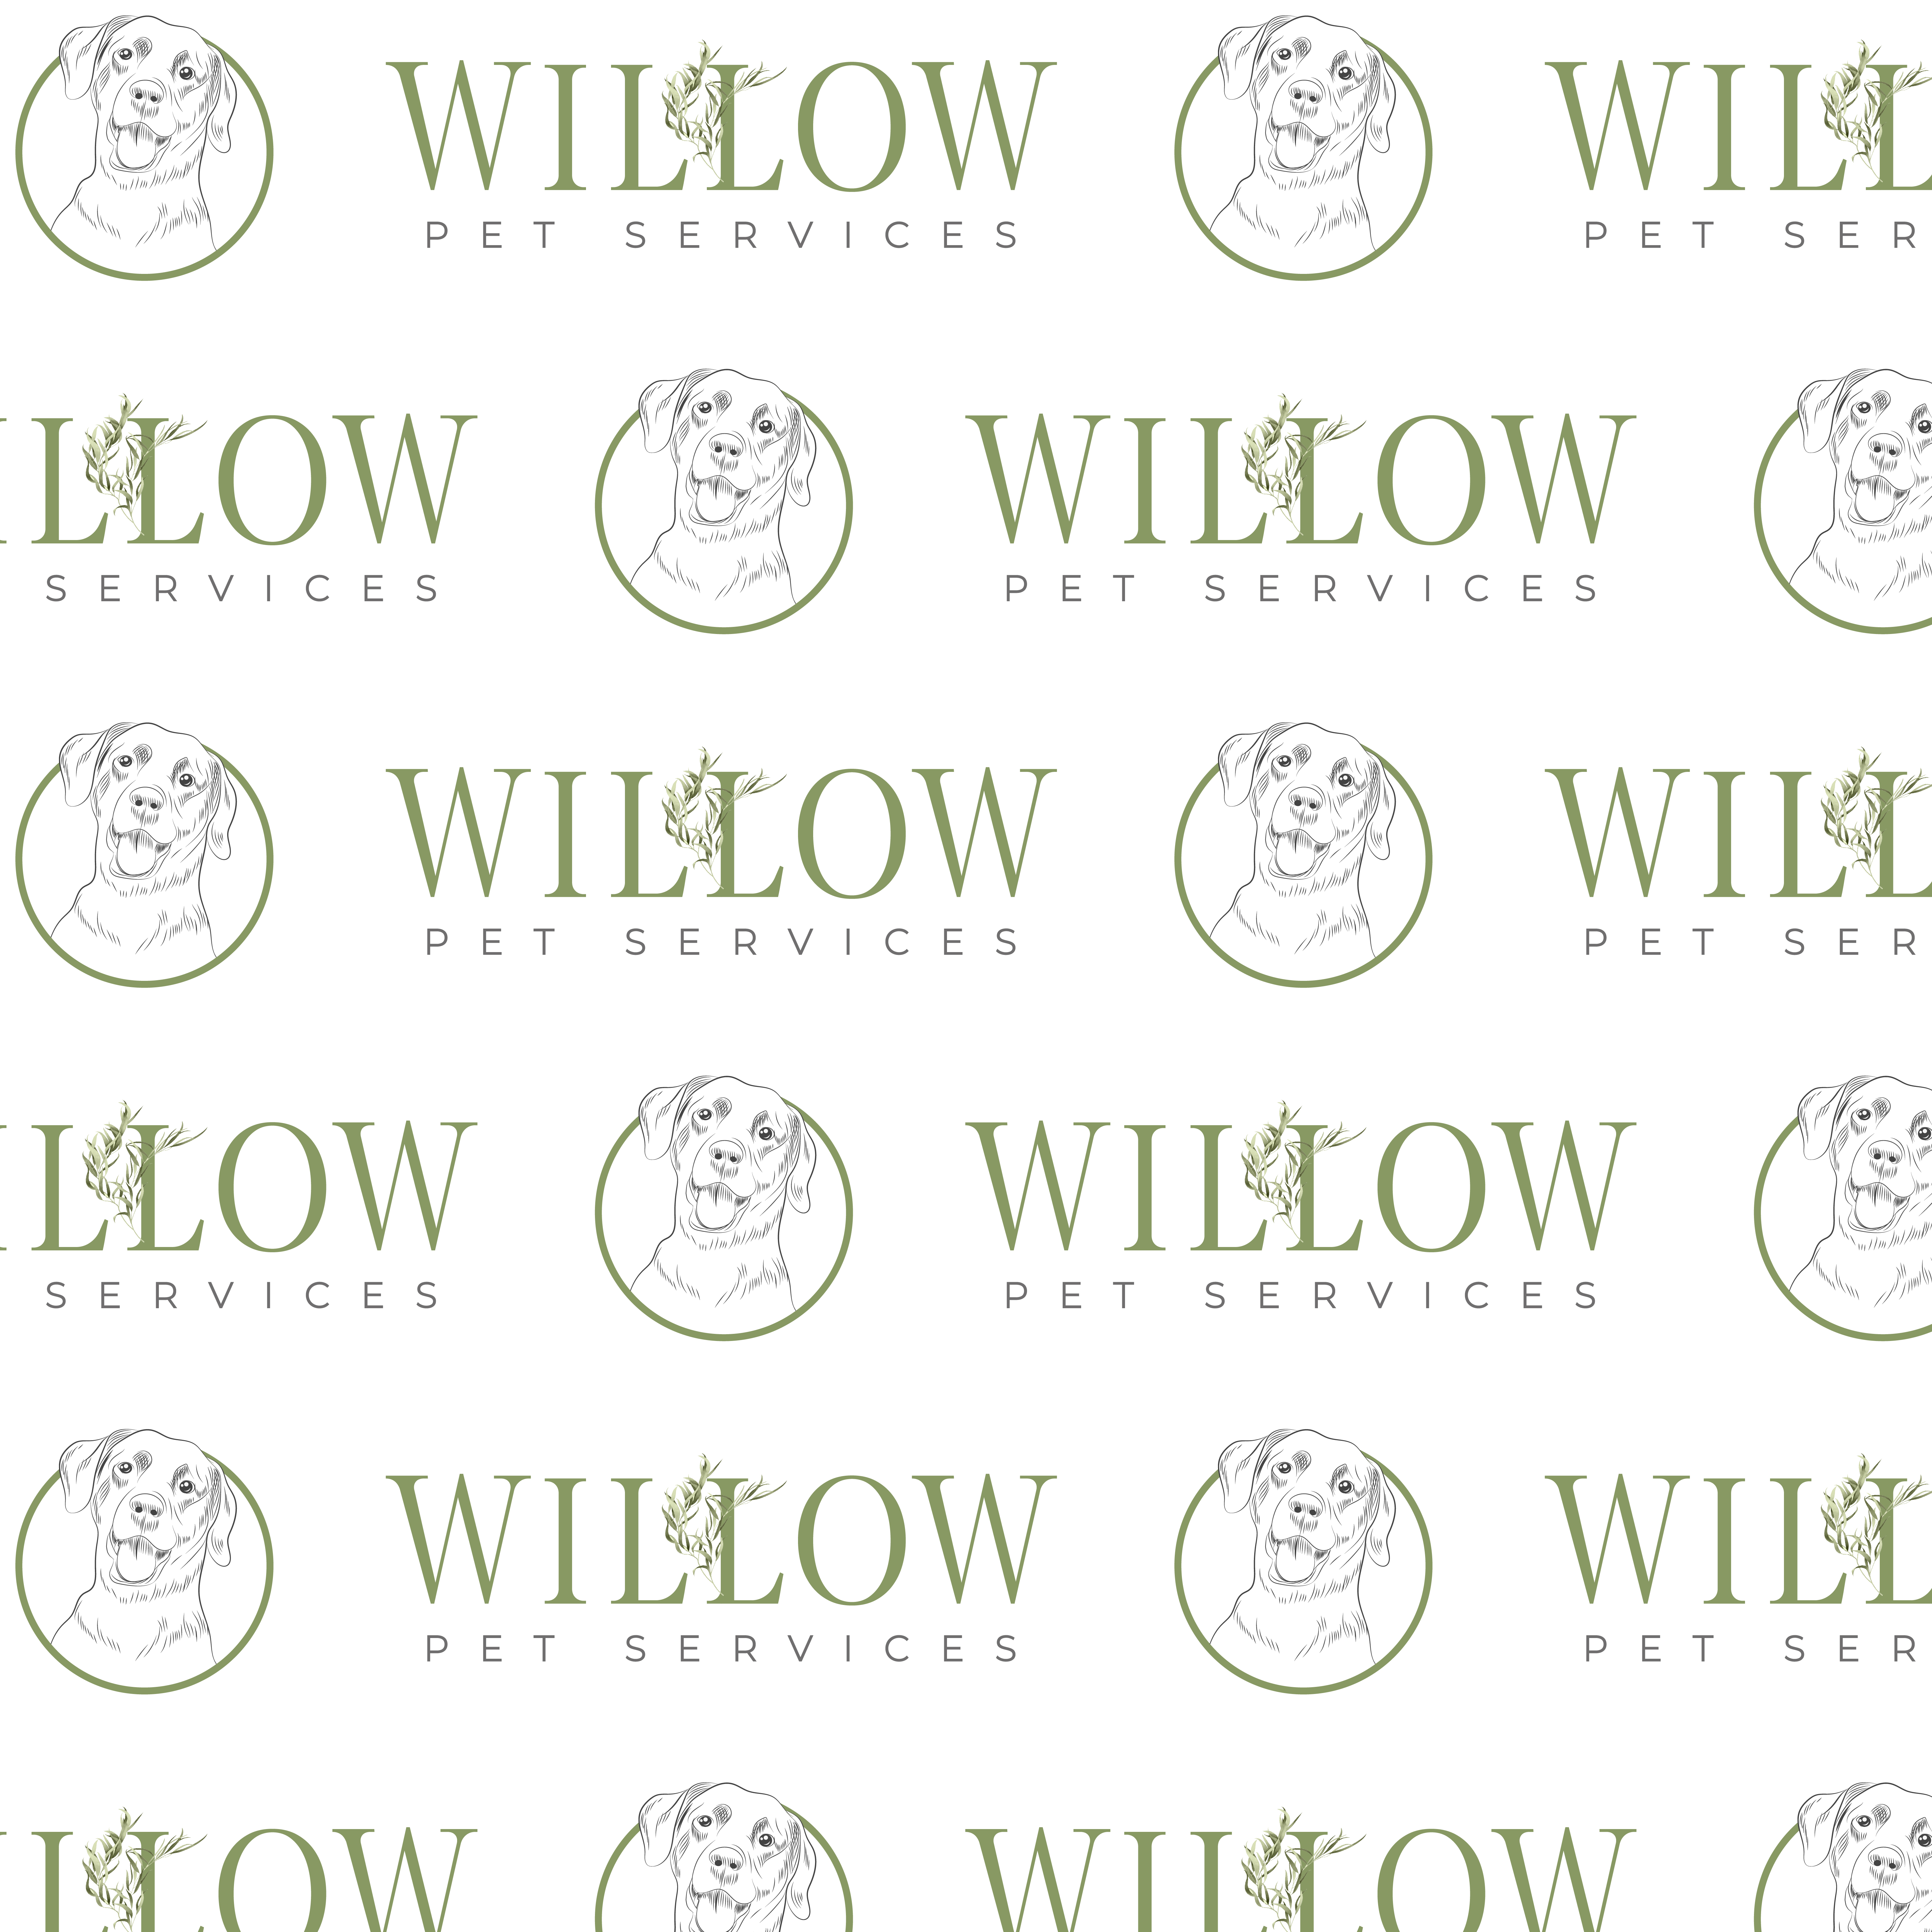 r45-willow-pet-services-pattern-01---copy-1635725542576.jpg